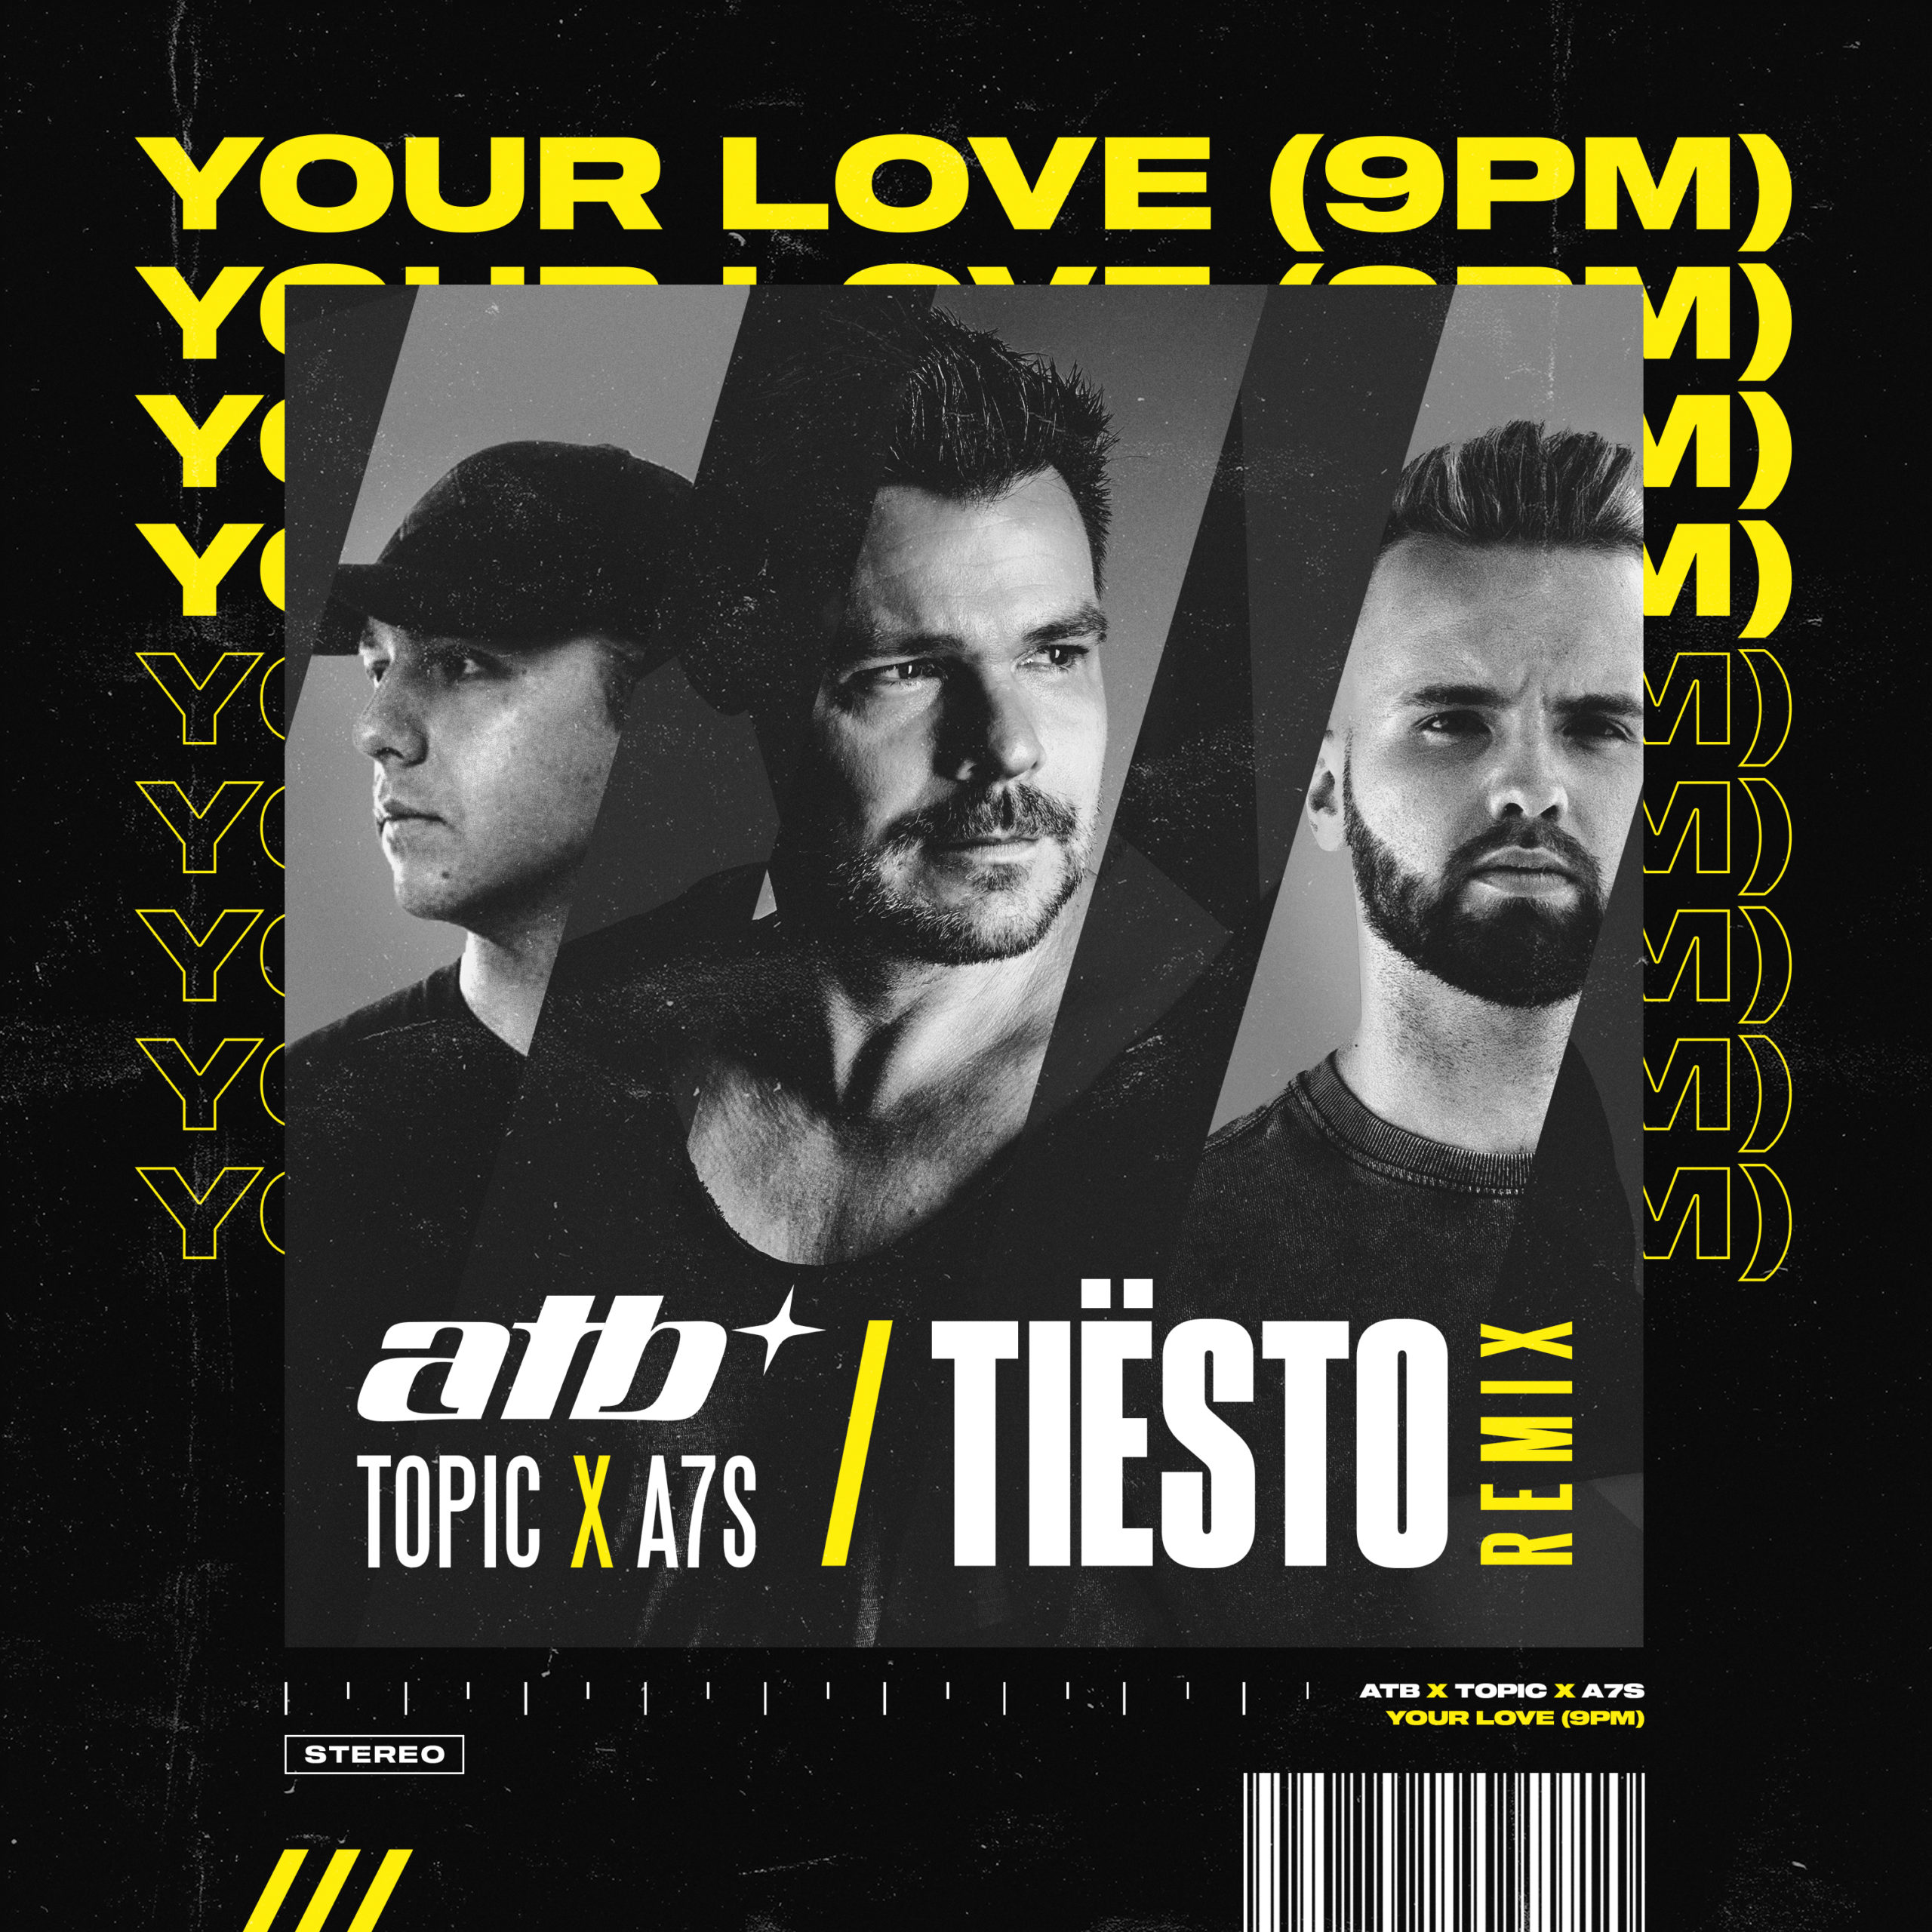 Atb topic a7s your. ATB - your Love (9pm). ATB, topic, a7s - your Love (9pm). Your Love 9 PM Tiesto Remix. ATB X topic x a7s - your Love (9pm).